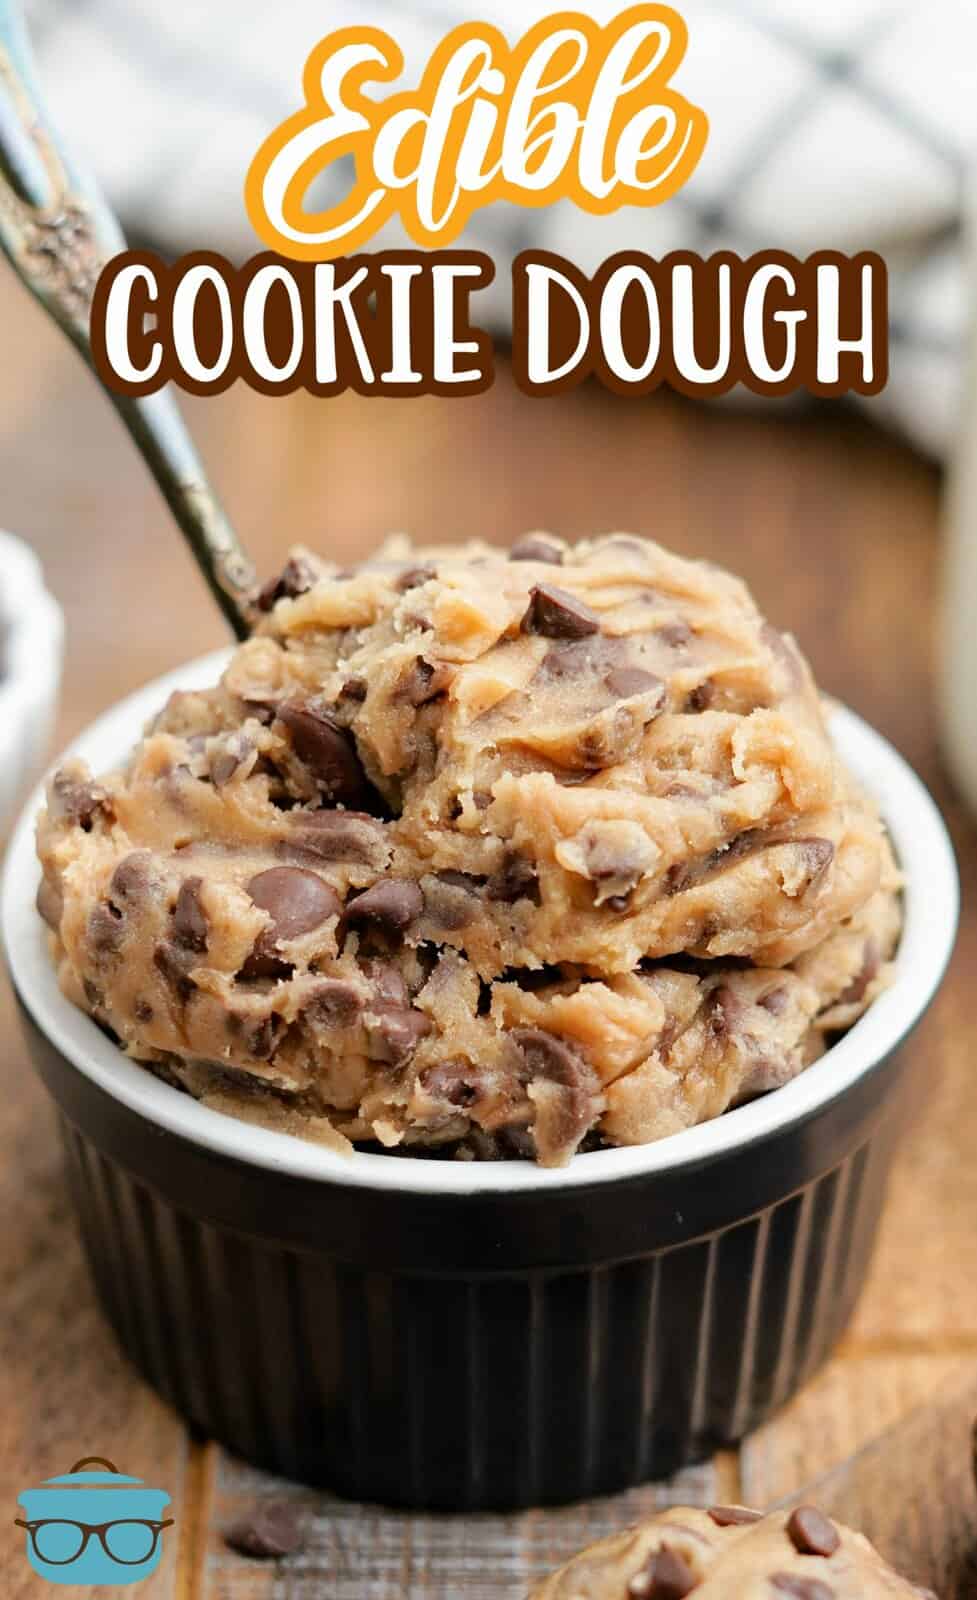 Pinterest image close up of Edible Chocolate Chip Cookie Dough with spoon in ramekin.